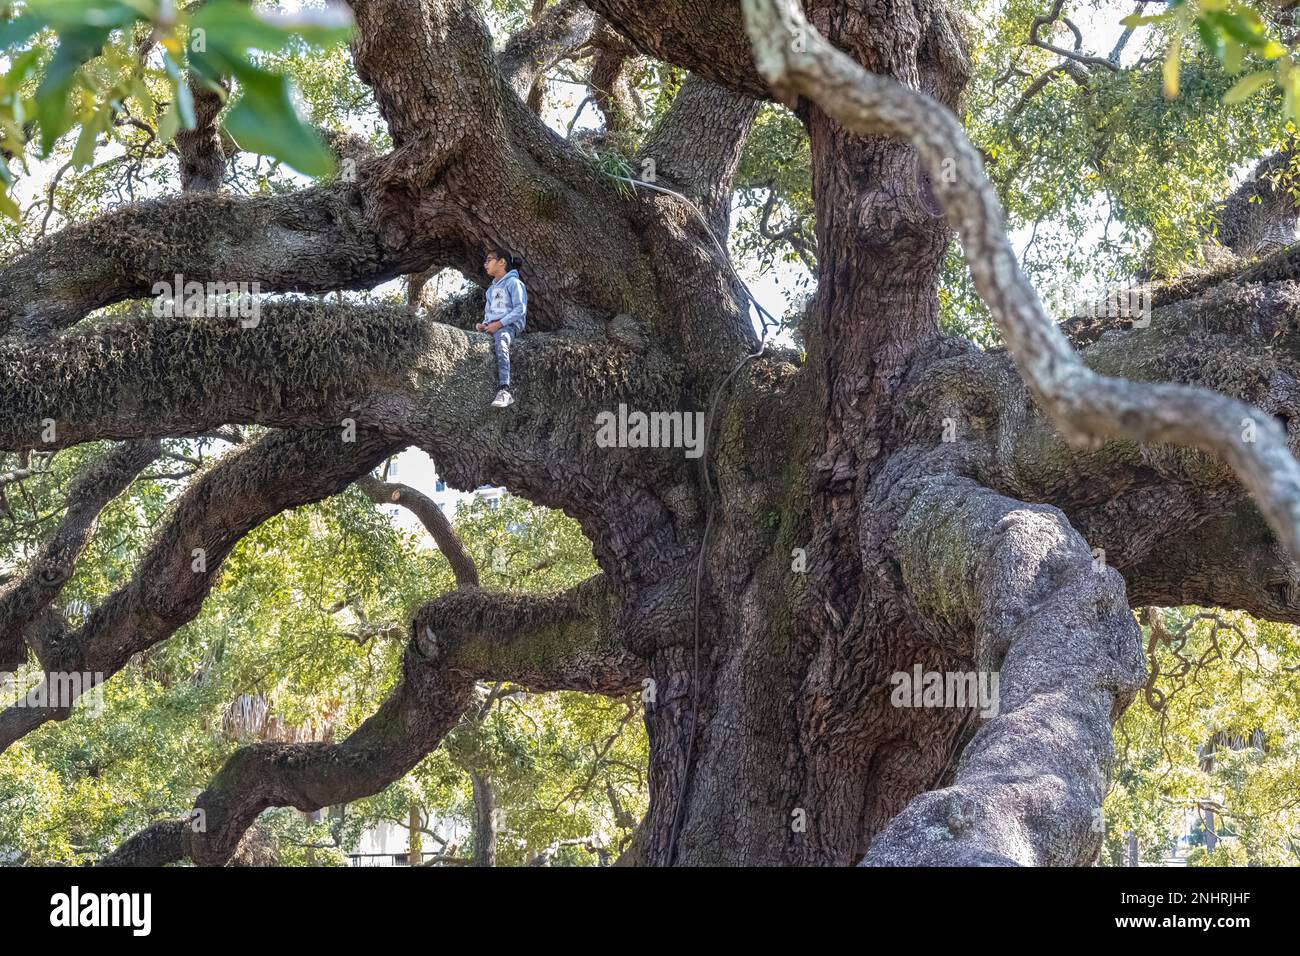 A girl sitting high upon a branch of Treaty Oak, a giant landmark Southern live oak tree in downtown Jacksonville, Florida, at Jessie Ball duPont Park. Stock Photo